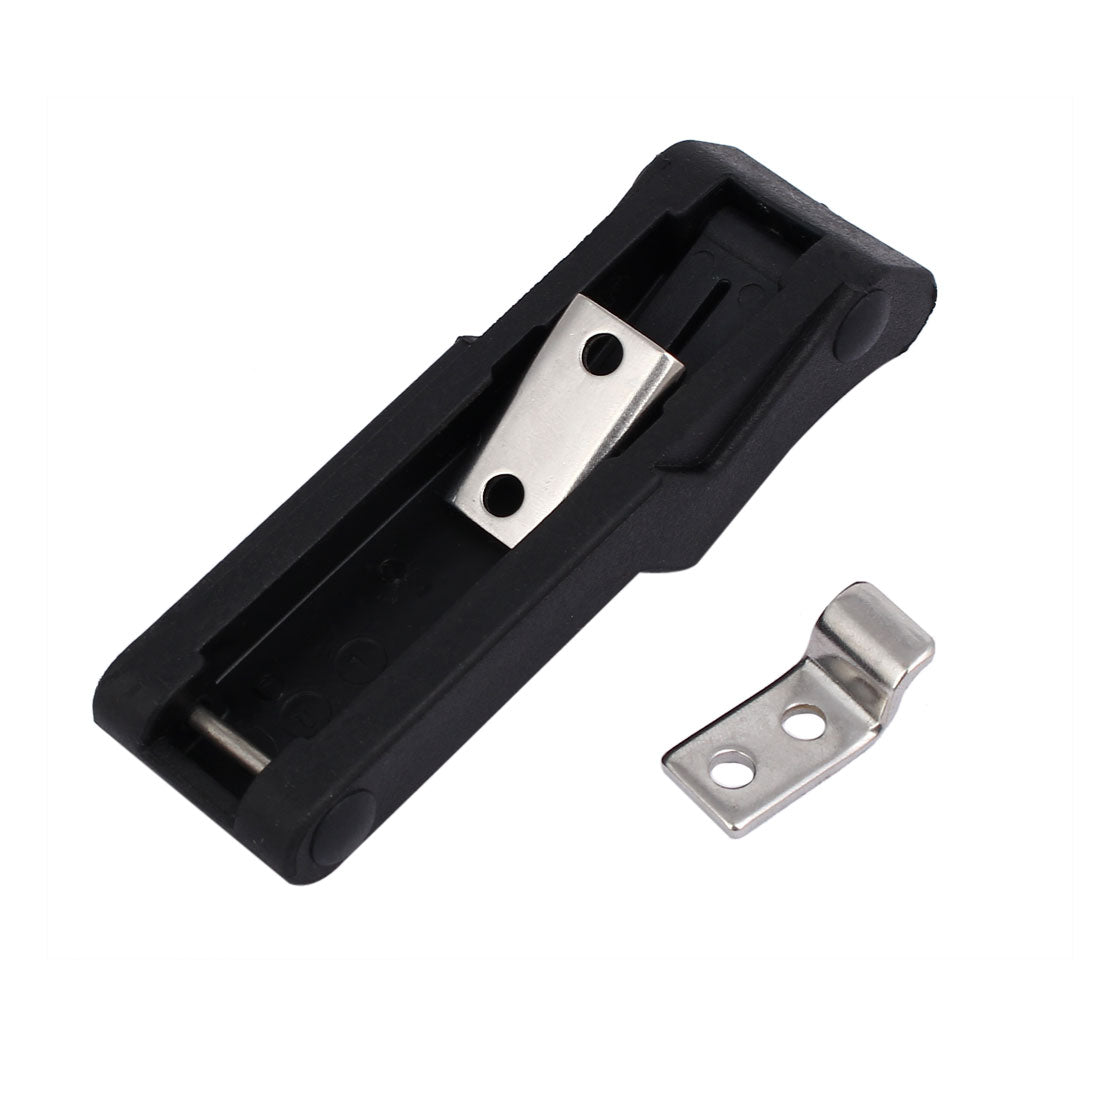 uxcell Uxcell Cabinets Draw Boxes Rubber Security Toggle Hasp Latch Lock Black 96.5x29x20mm